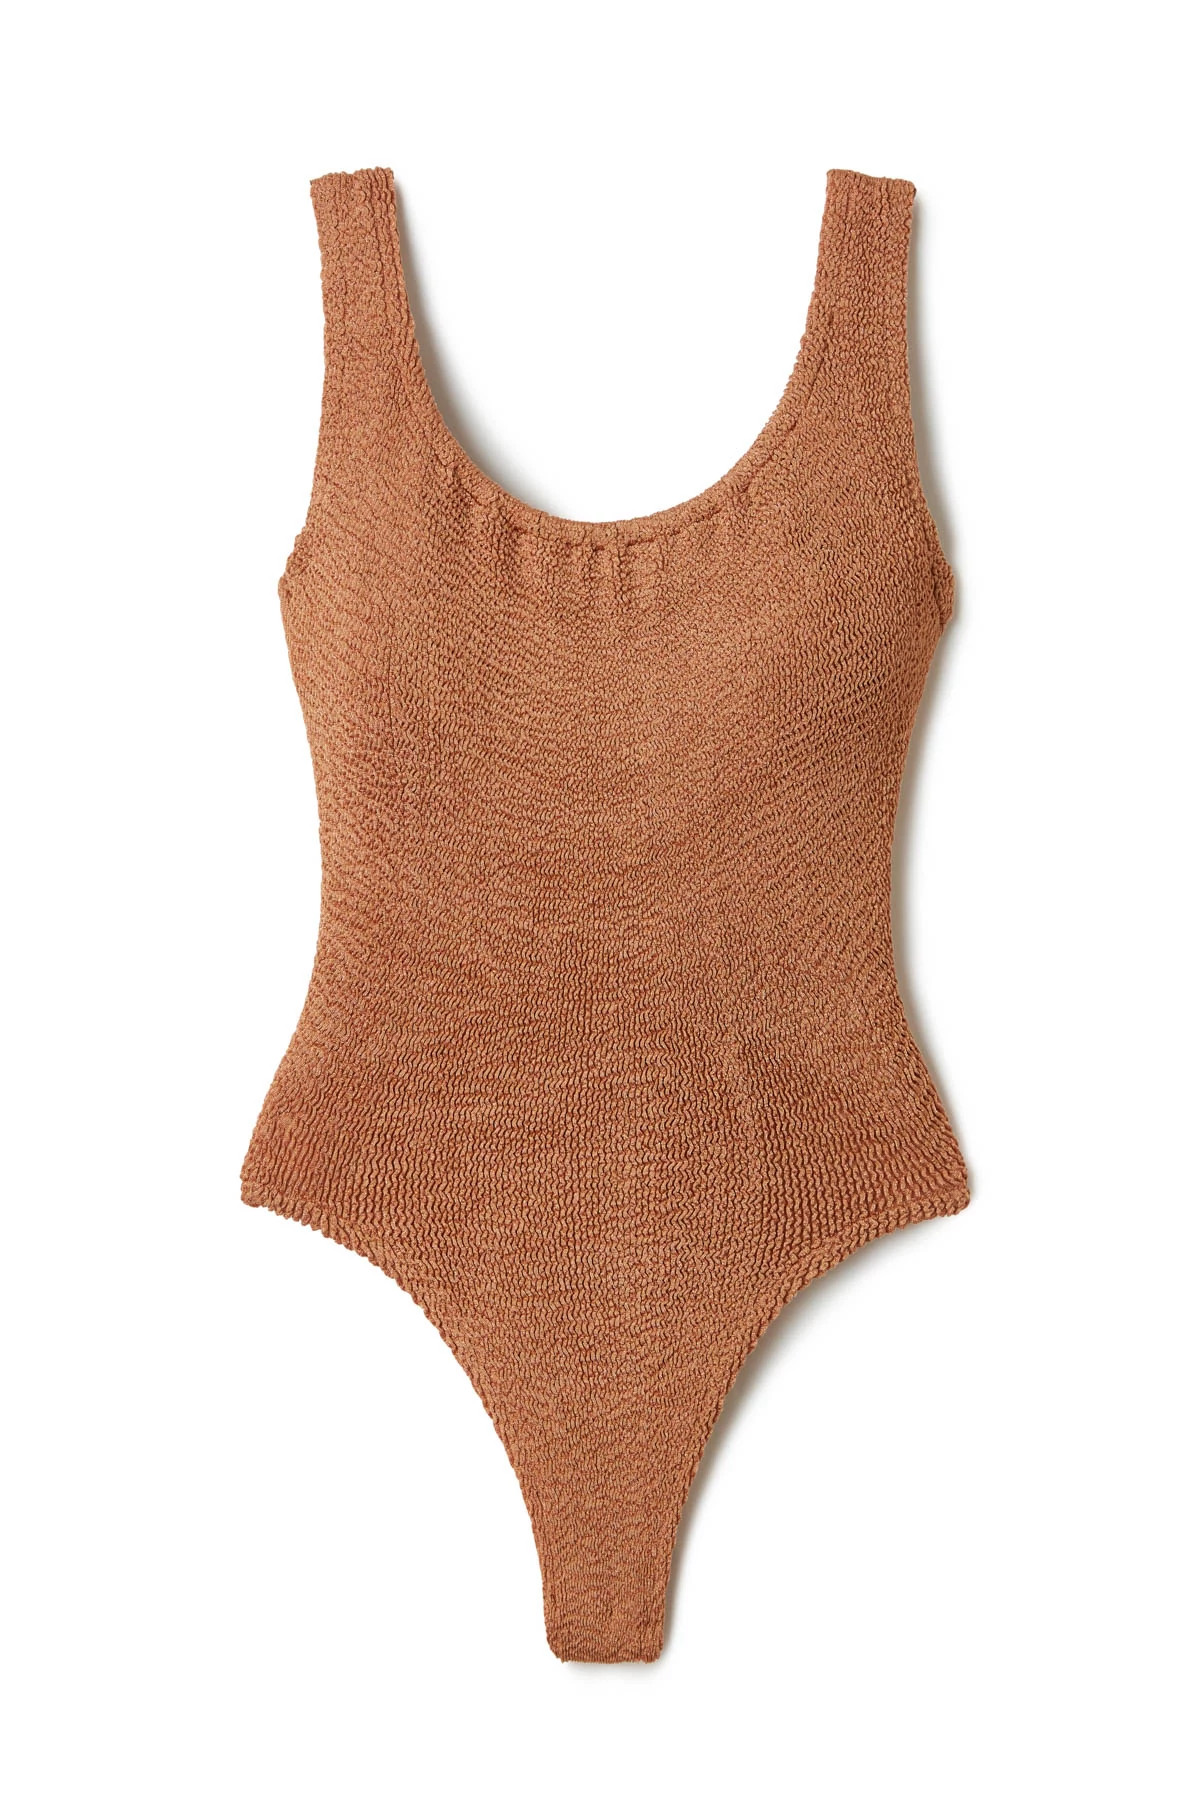 METALLIC COCOA Classic Square Neck One Piece Swimsuit image number 4